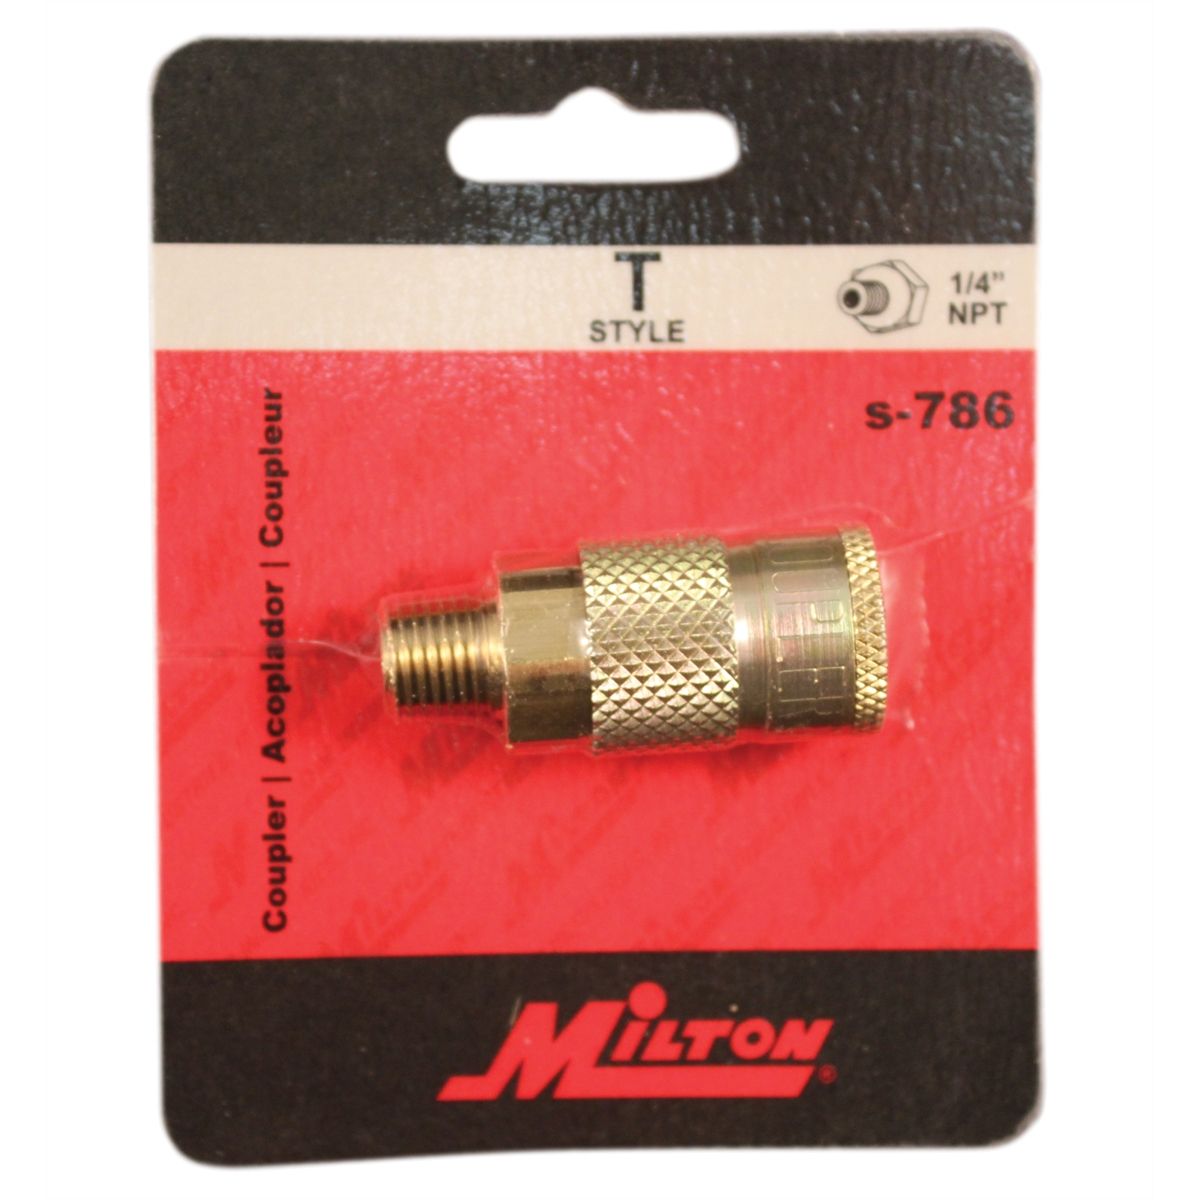 Tru-flate/Parker Style Air Hose Coupler Male 1/4 In NPT